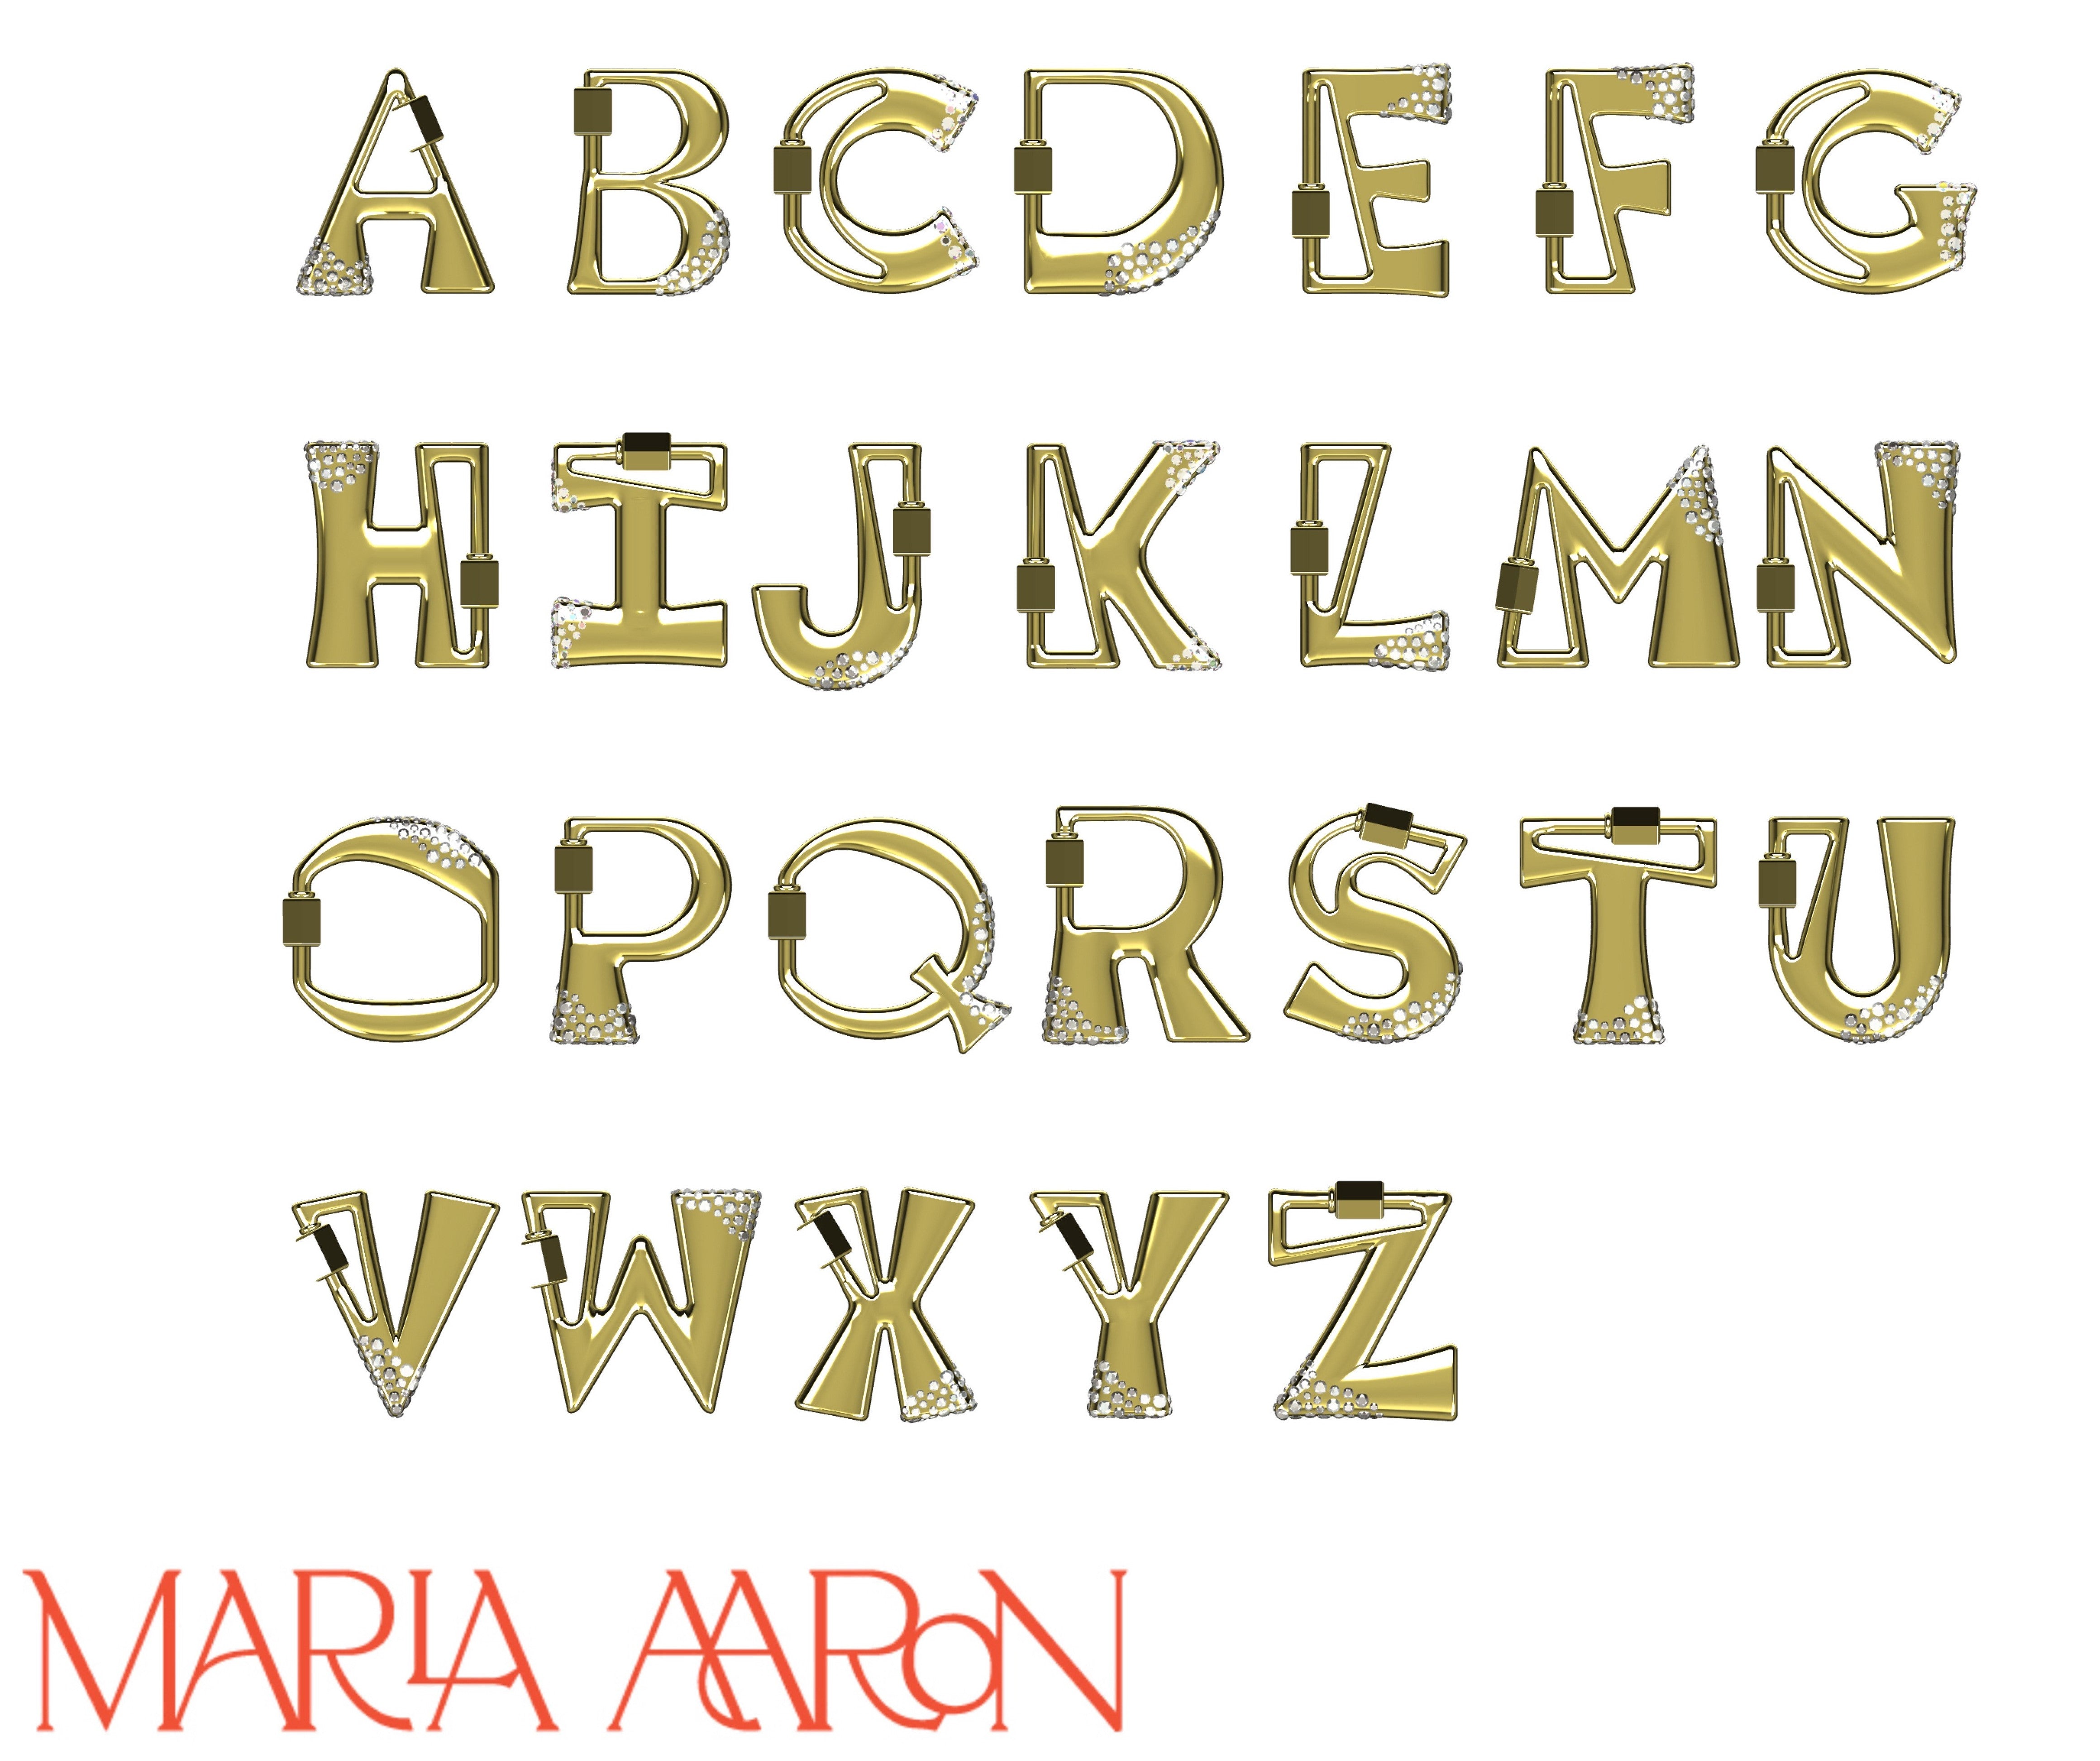 Gold locks of every letter of the alphabet including W charm against white backdrop with Marla Aaron logo in bottom left corner